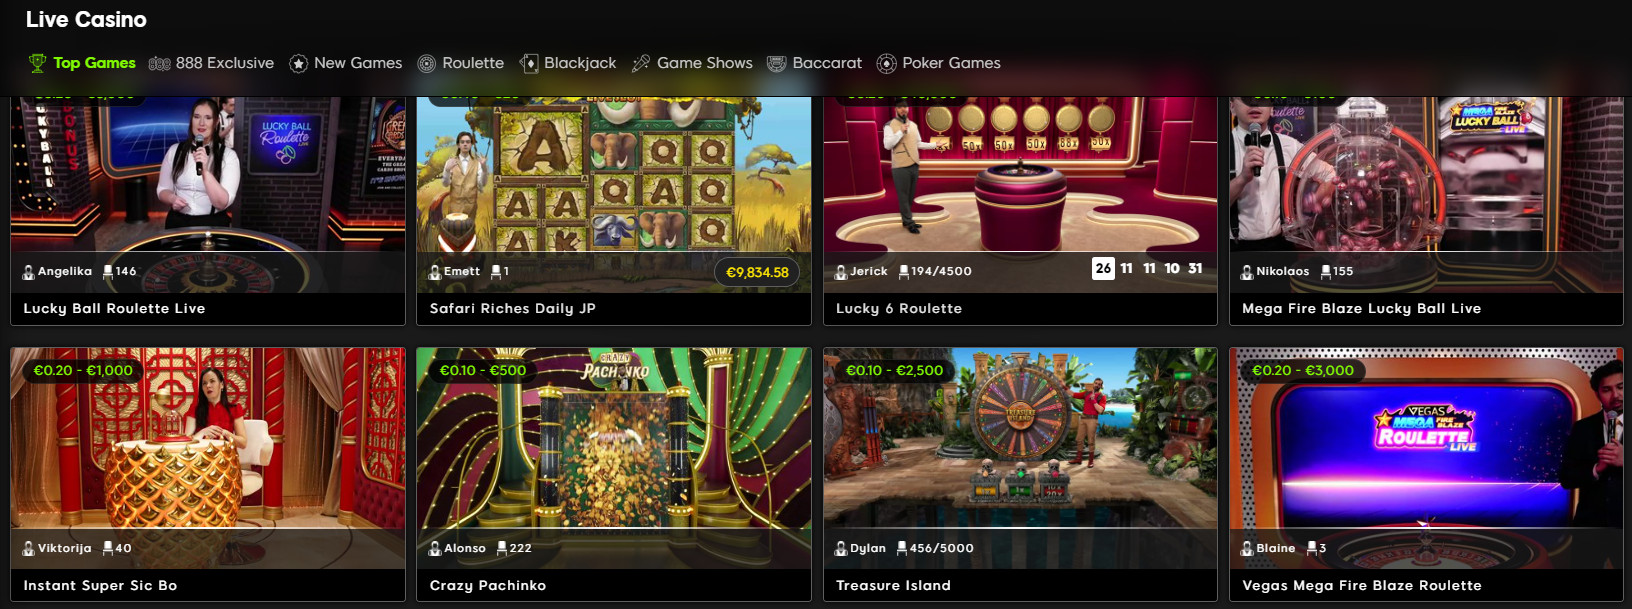 Live Casino Section at 888 Casino